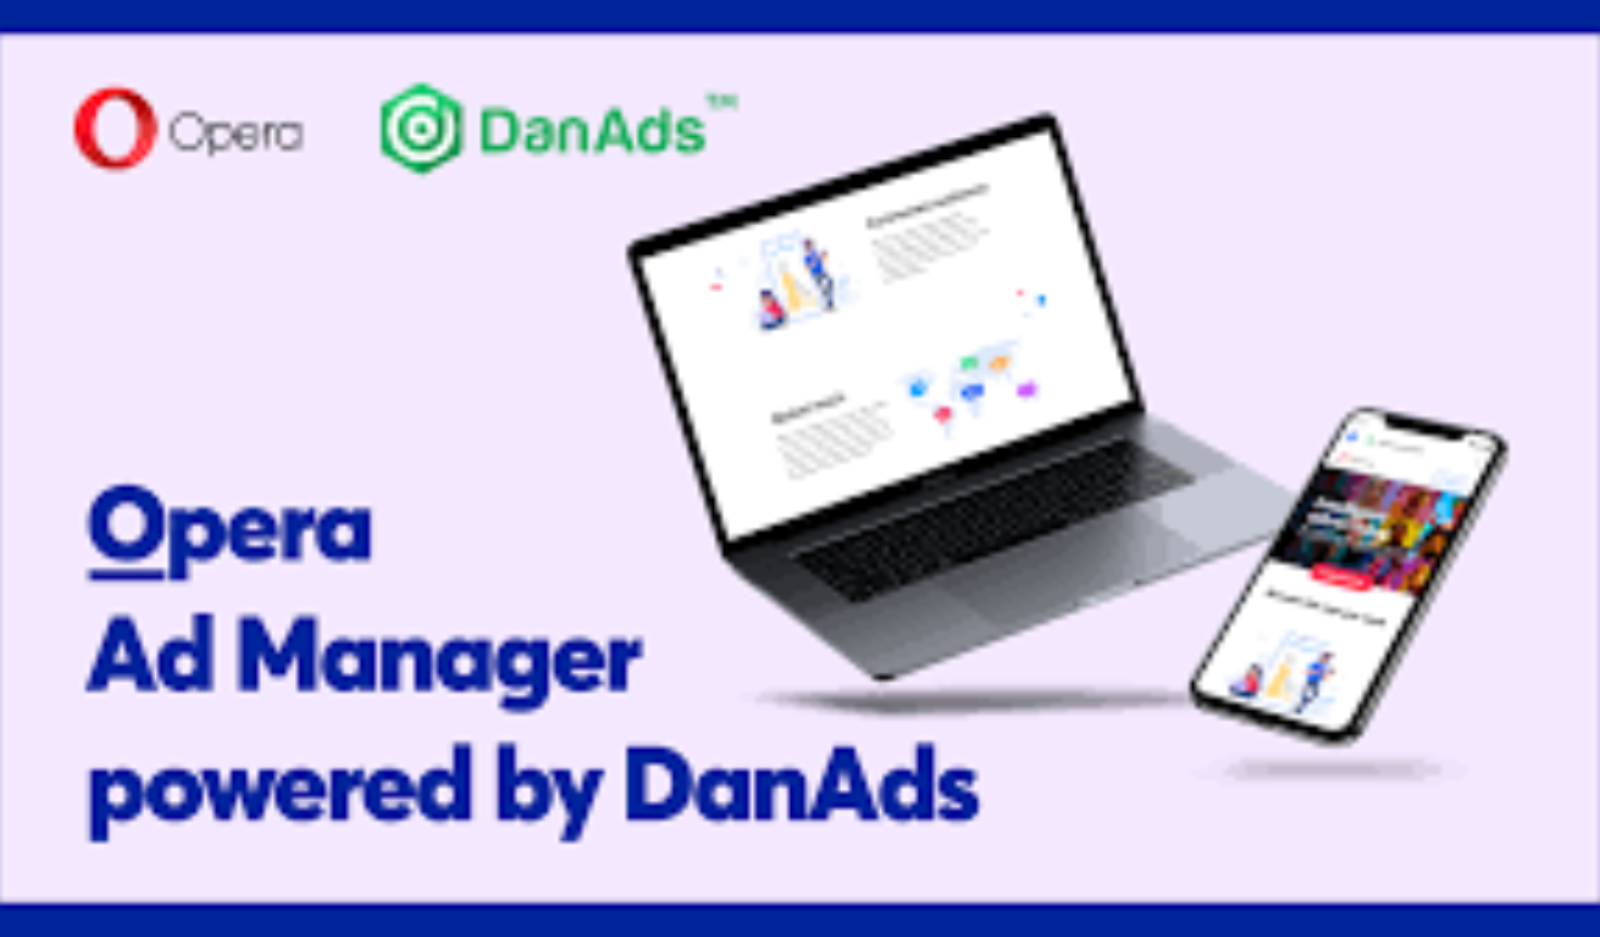 Opera Ads Launches Self Serve Digital Advertising Platform For SMBs